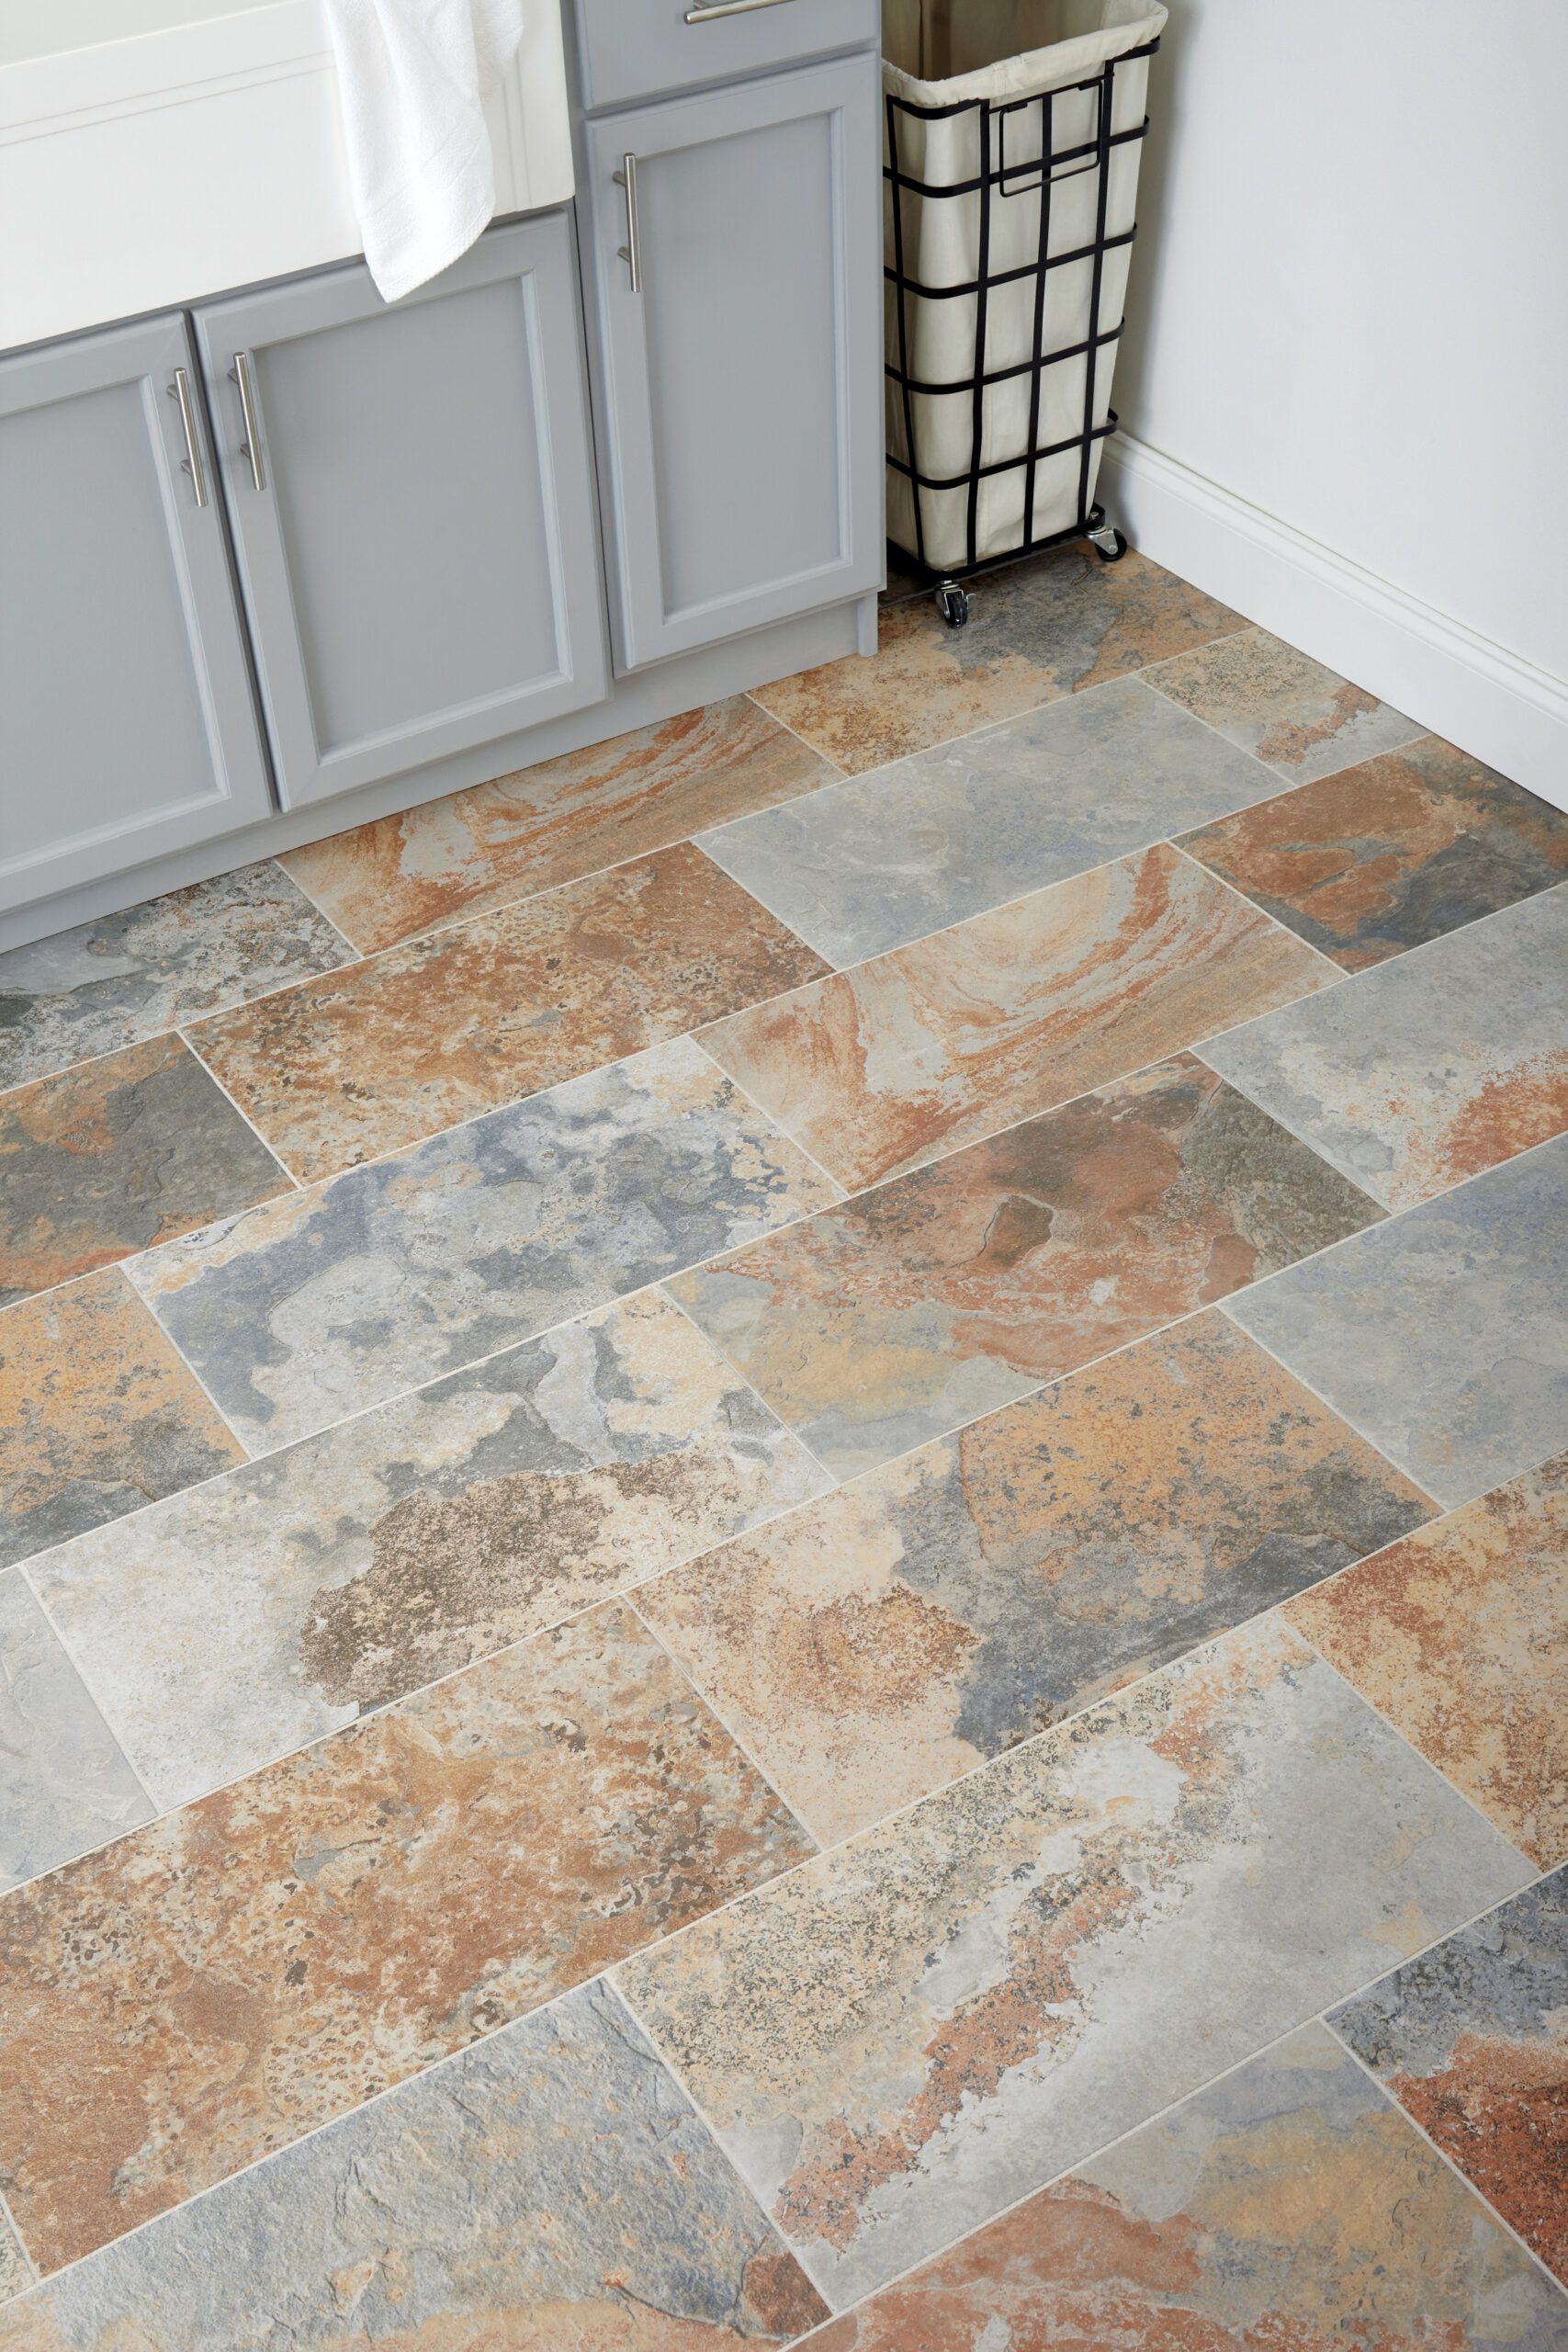 Large tiles without grout: continuous flooring